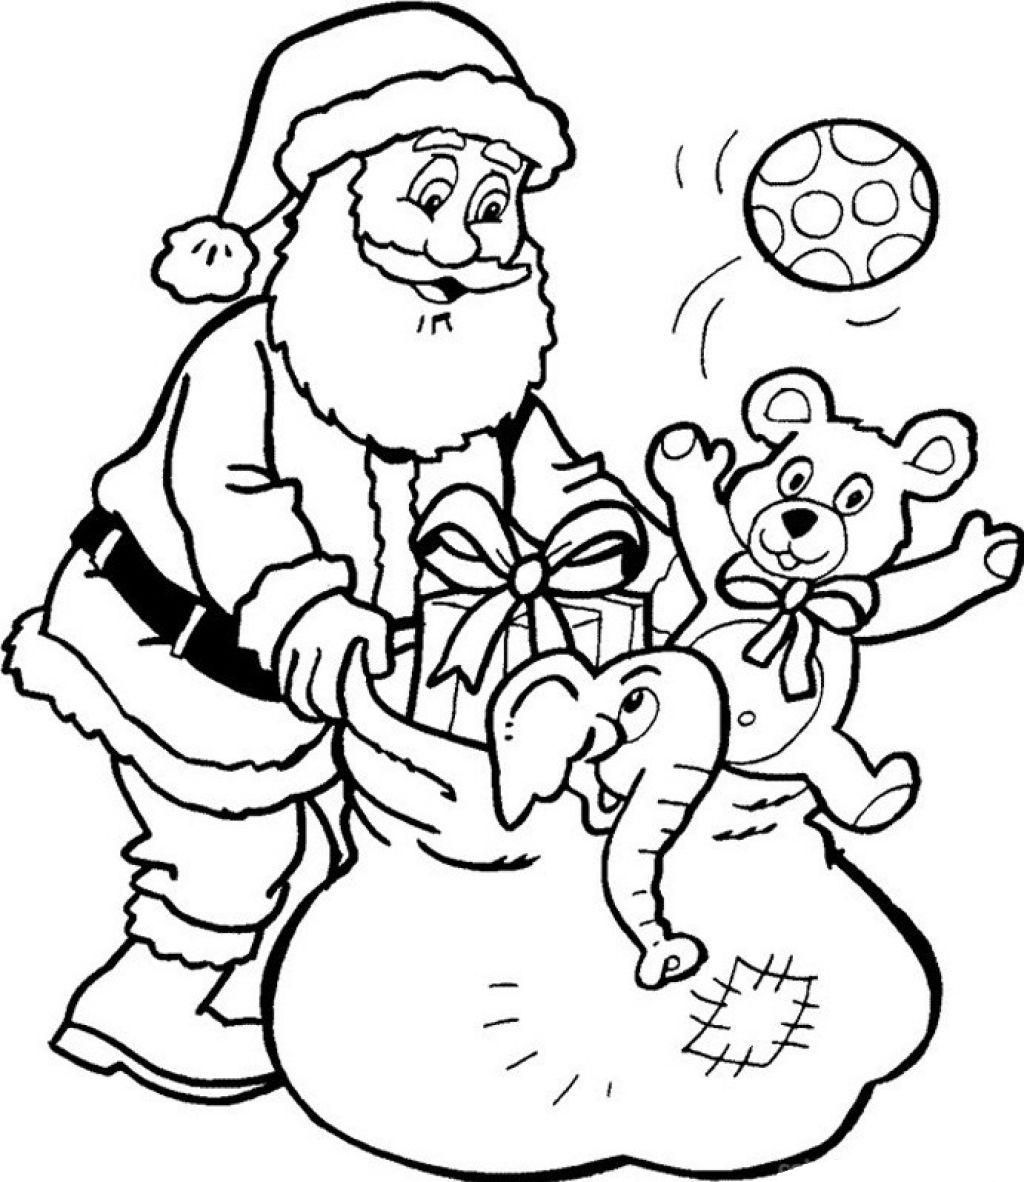 Easy Santa Coloring Page Coloring Pages